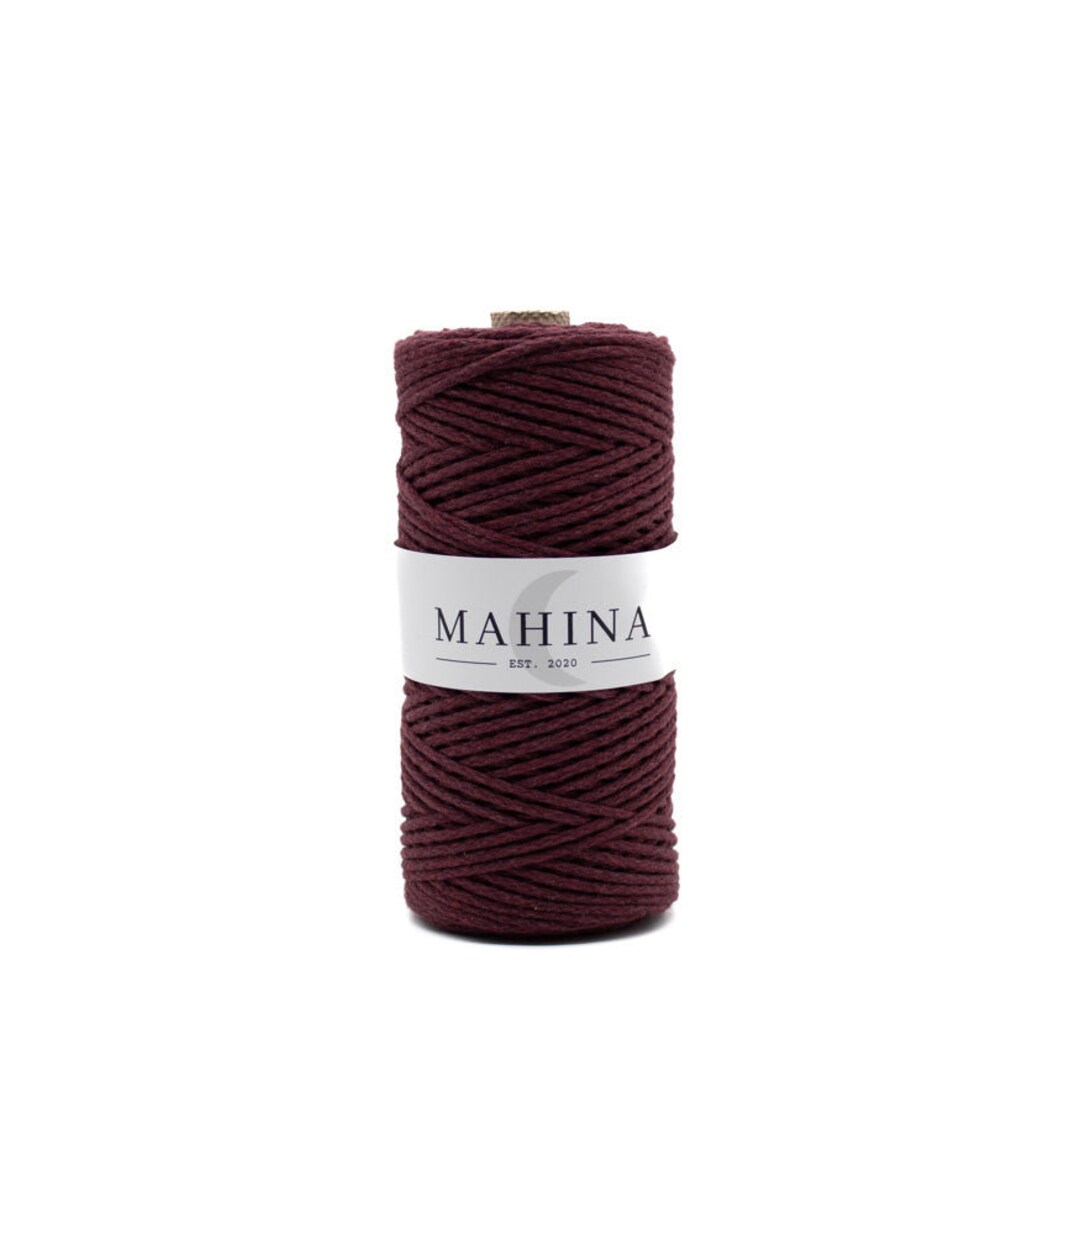 MAHINA - High-quality crochet lids for your DIY project - discover now!